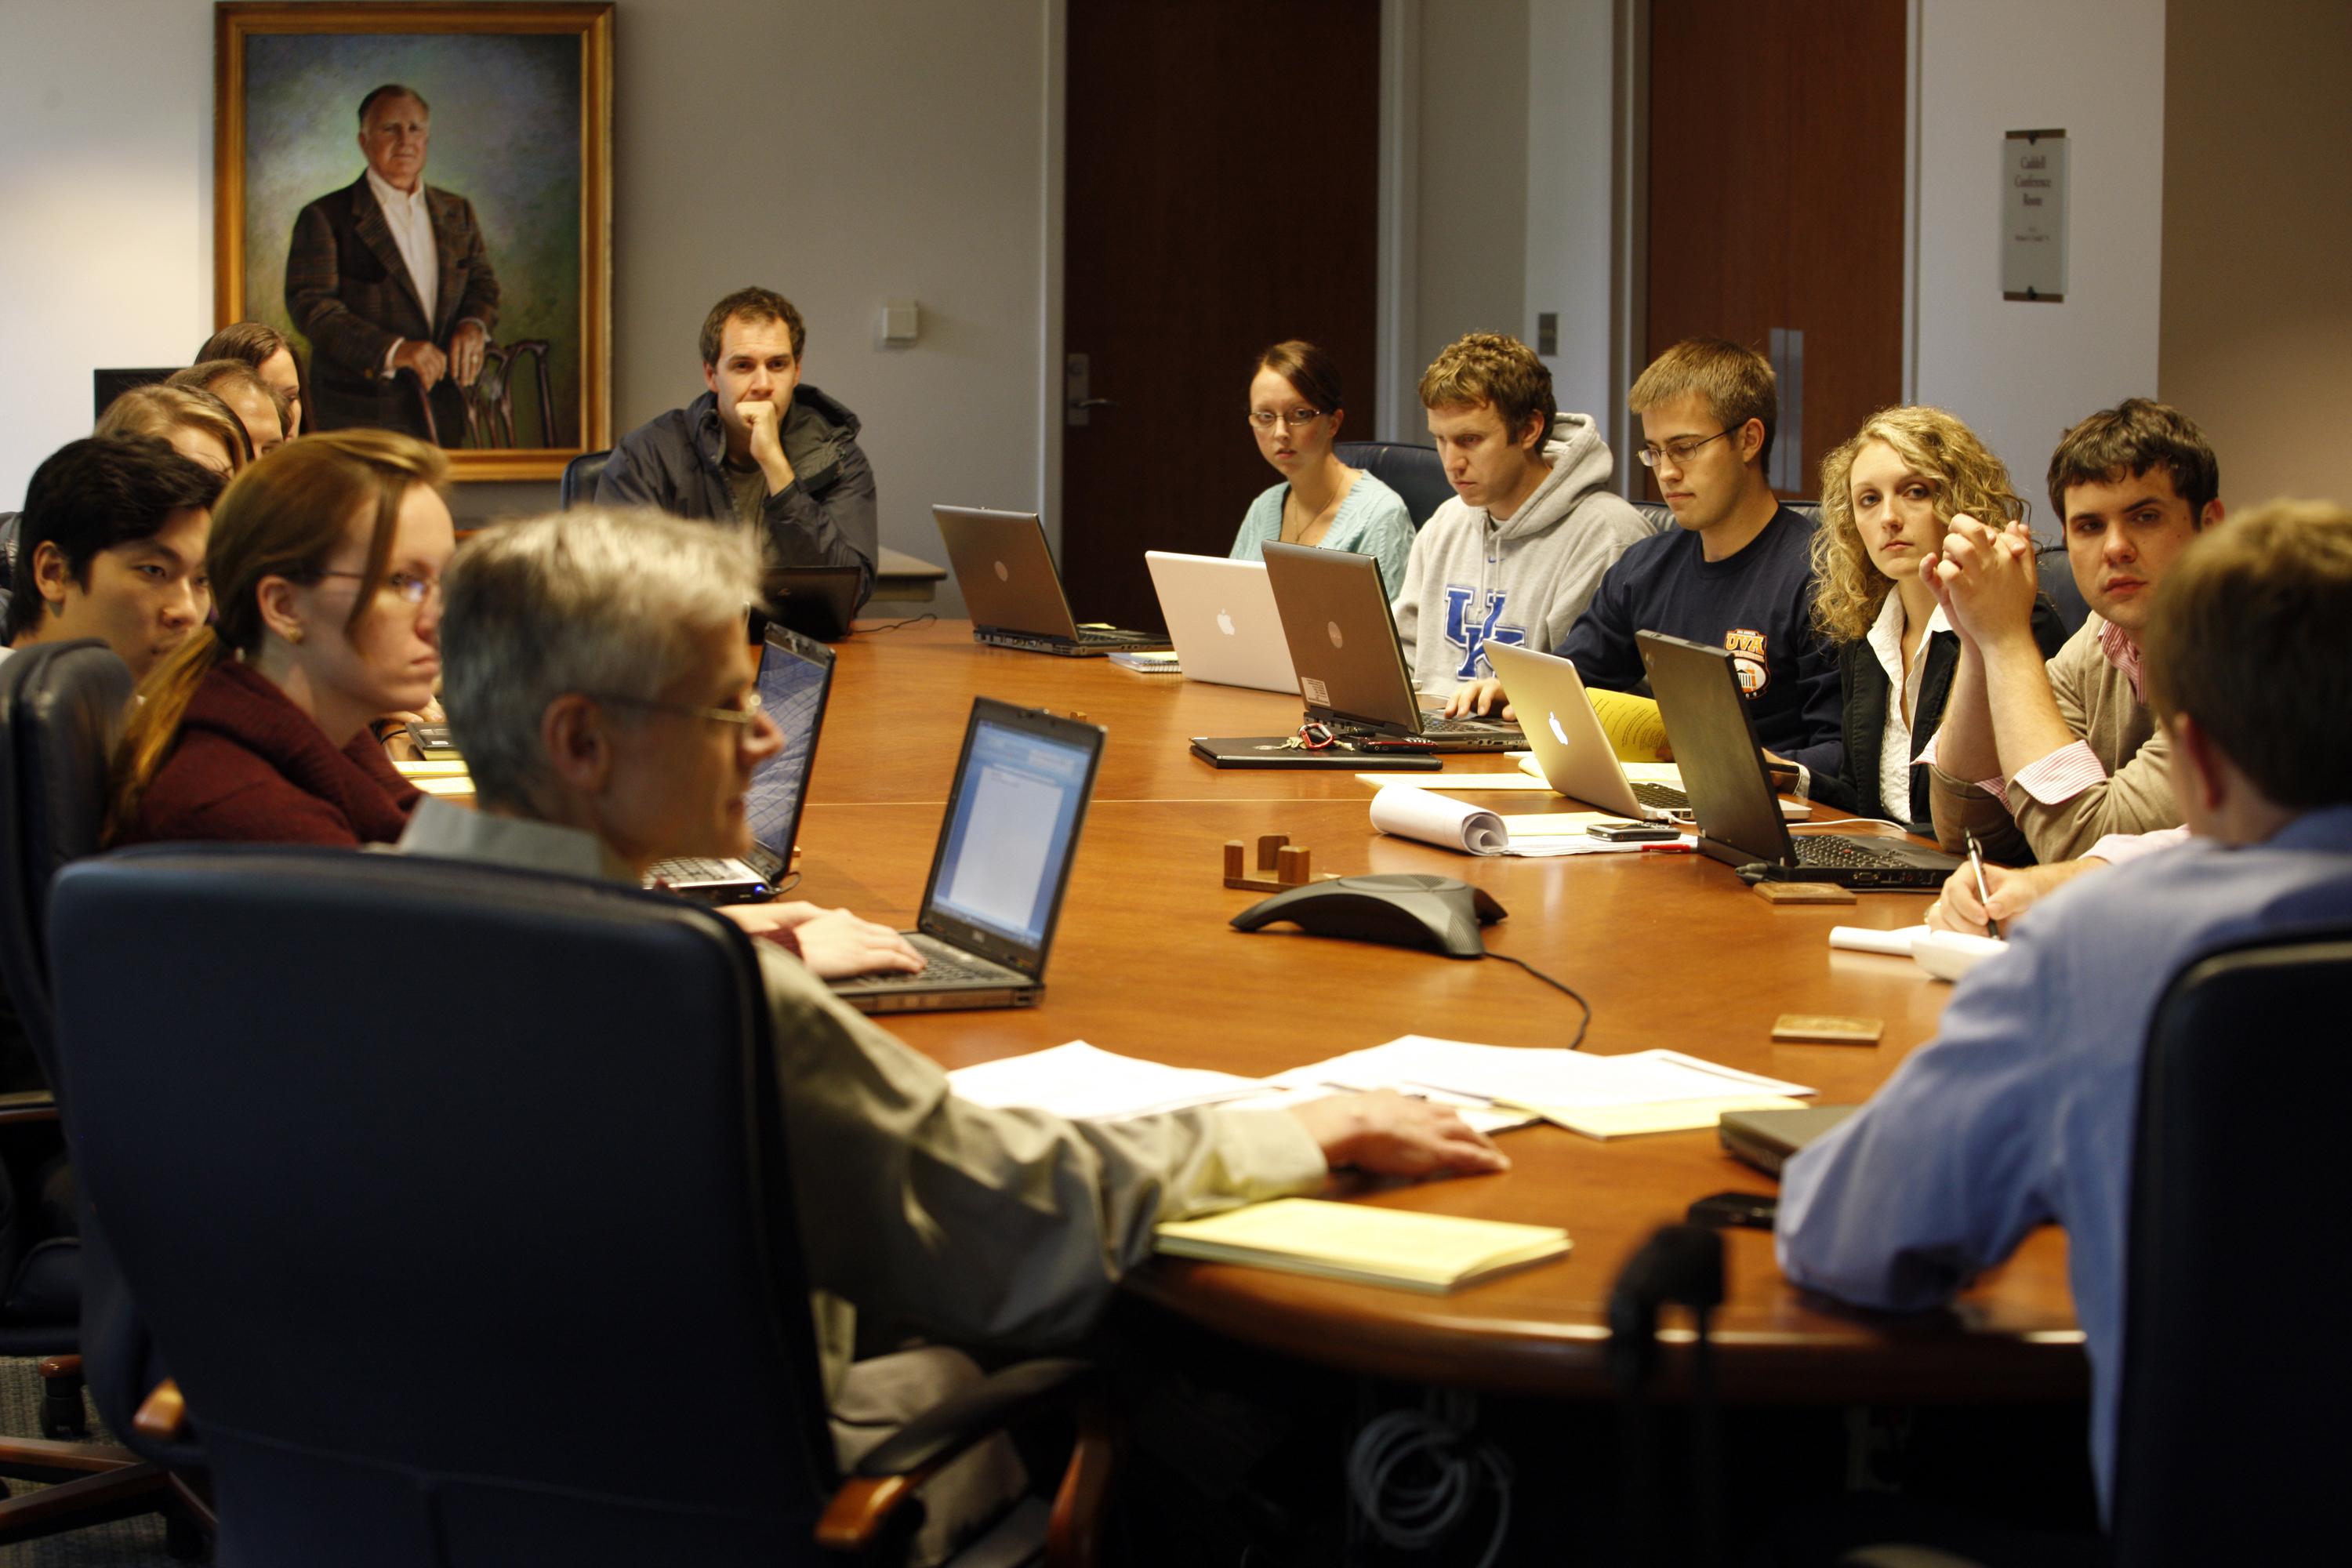 Group of people sitting at an oval table with laptops working together